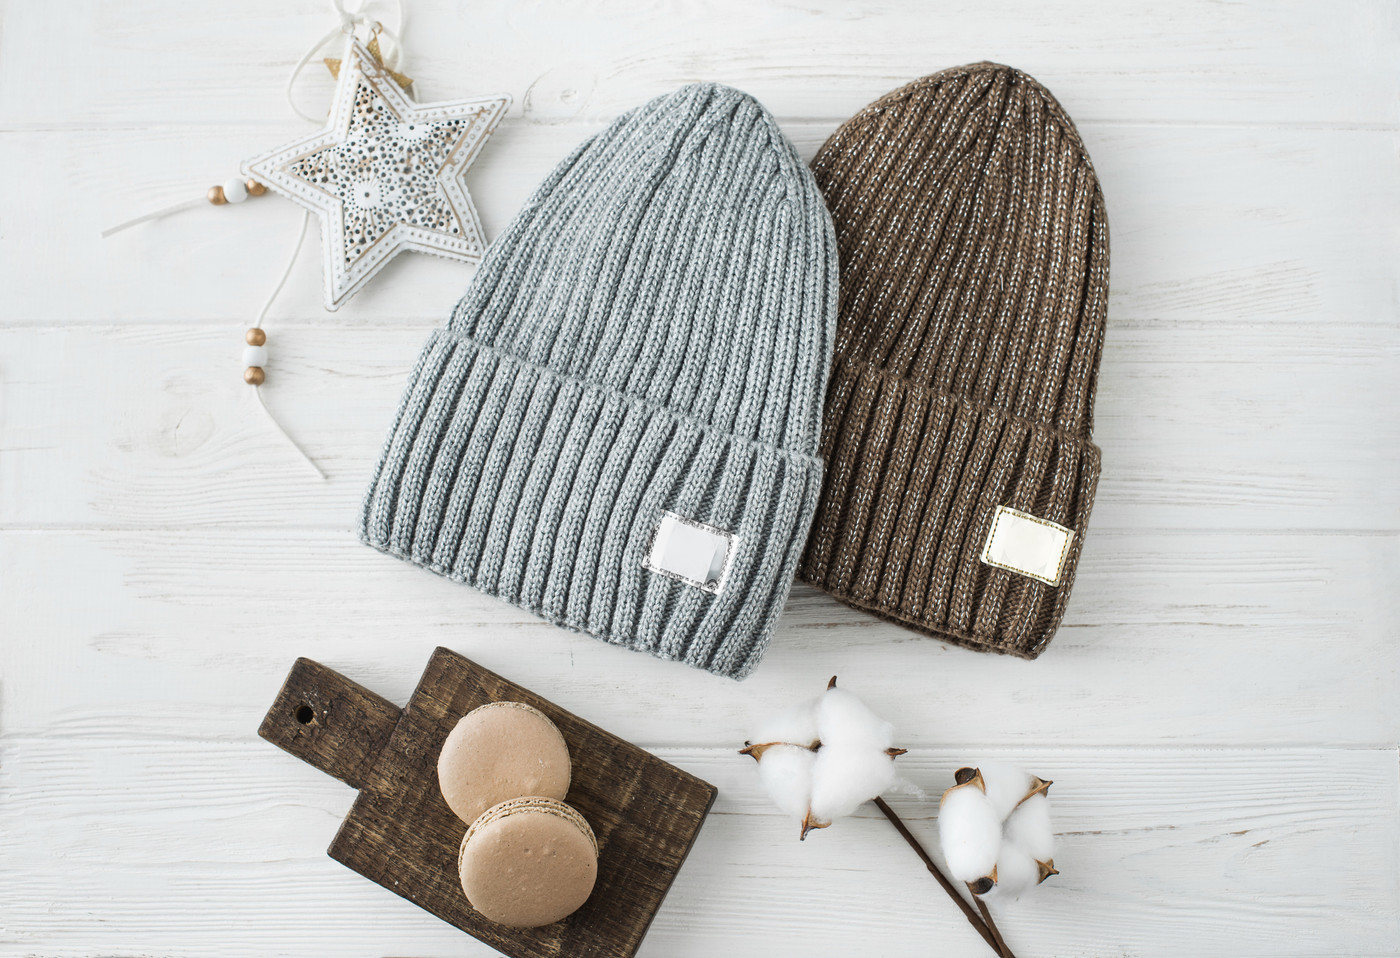 Knitted hats, cotton sprigs, macaroons close-up on a white